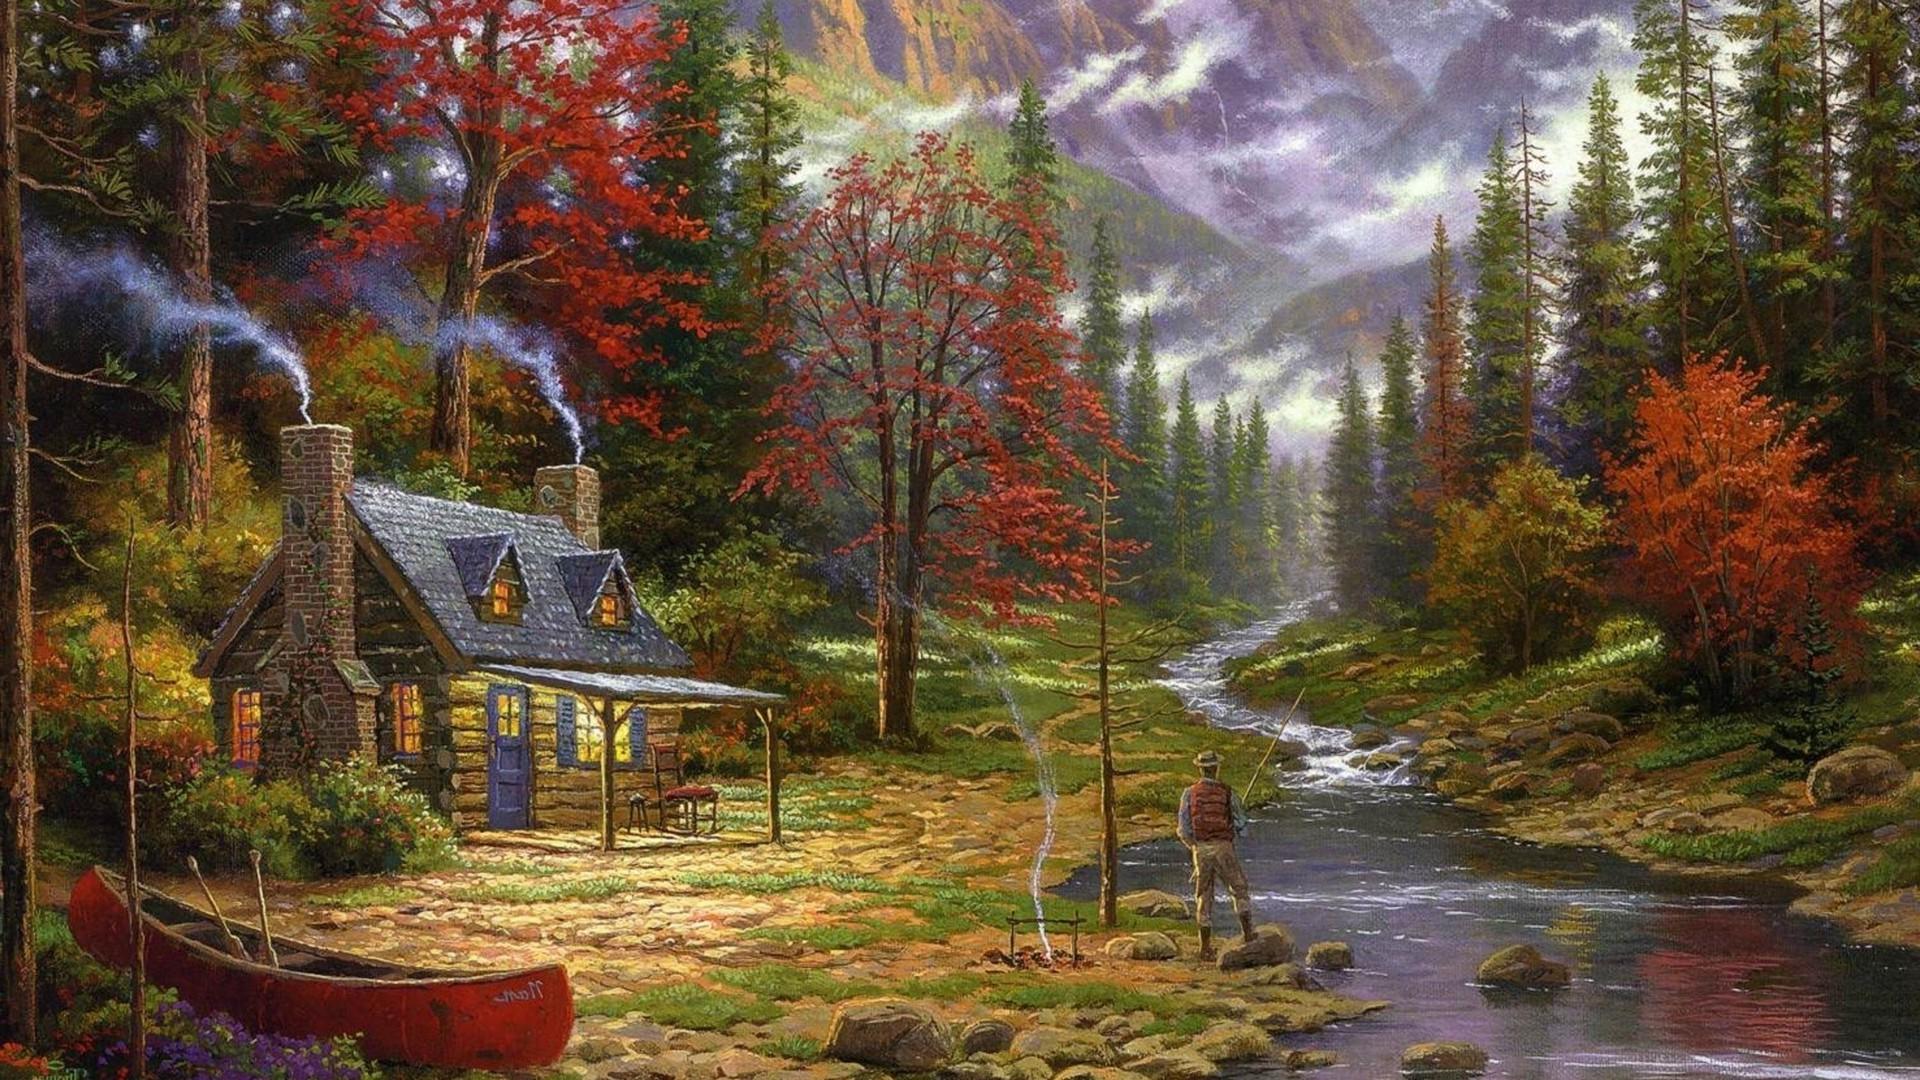 painting, Cottage, Canoes, River, Fishing, Forest, Chimneys